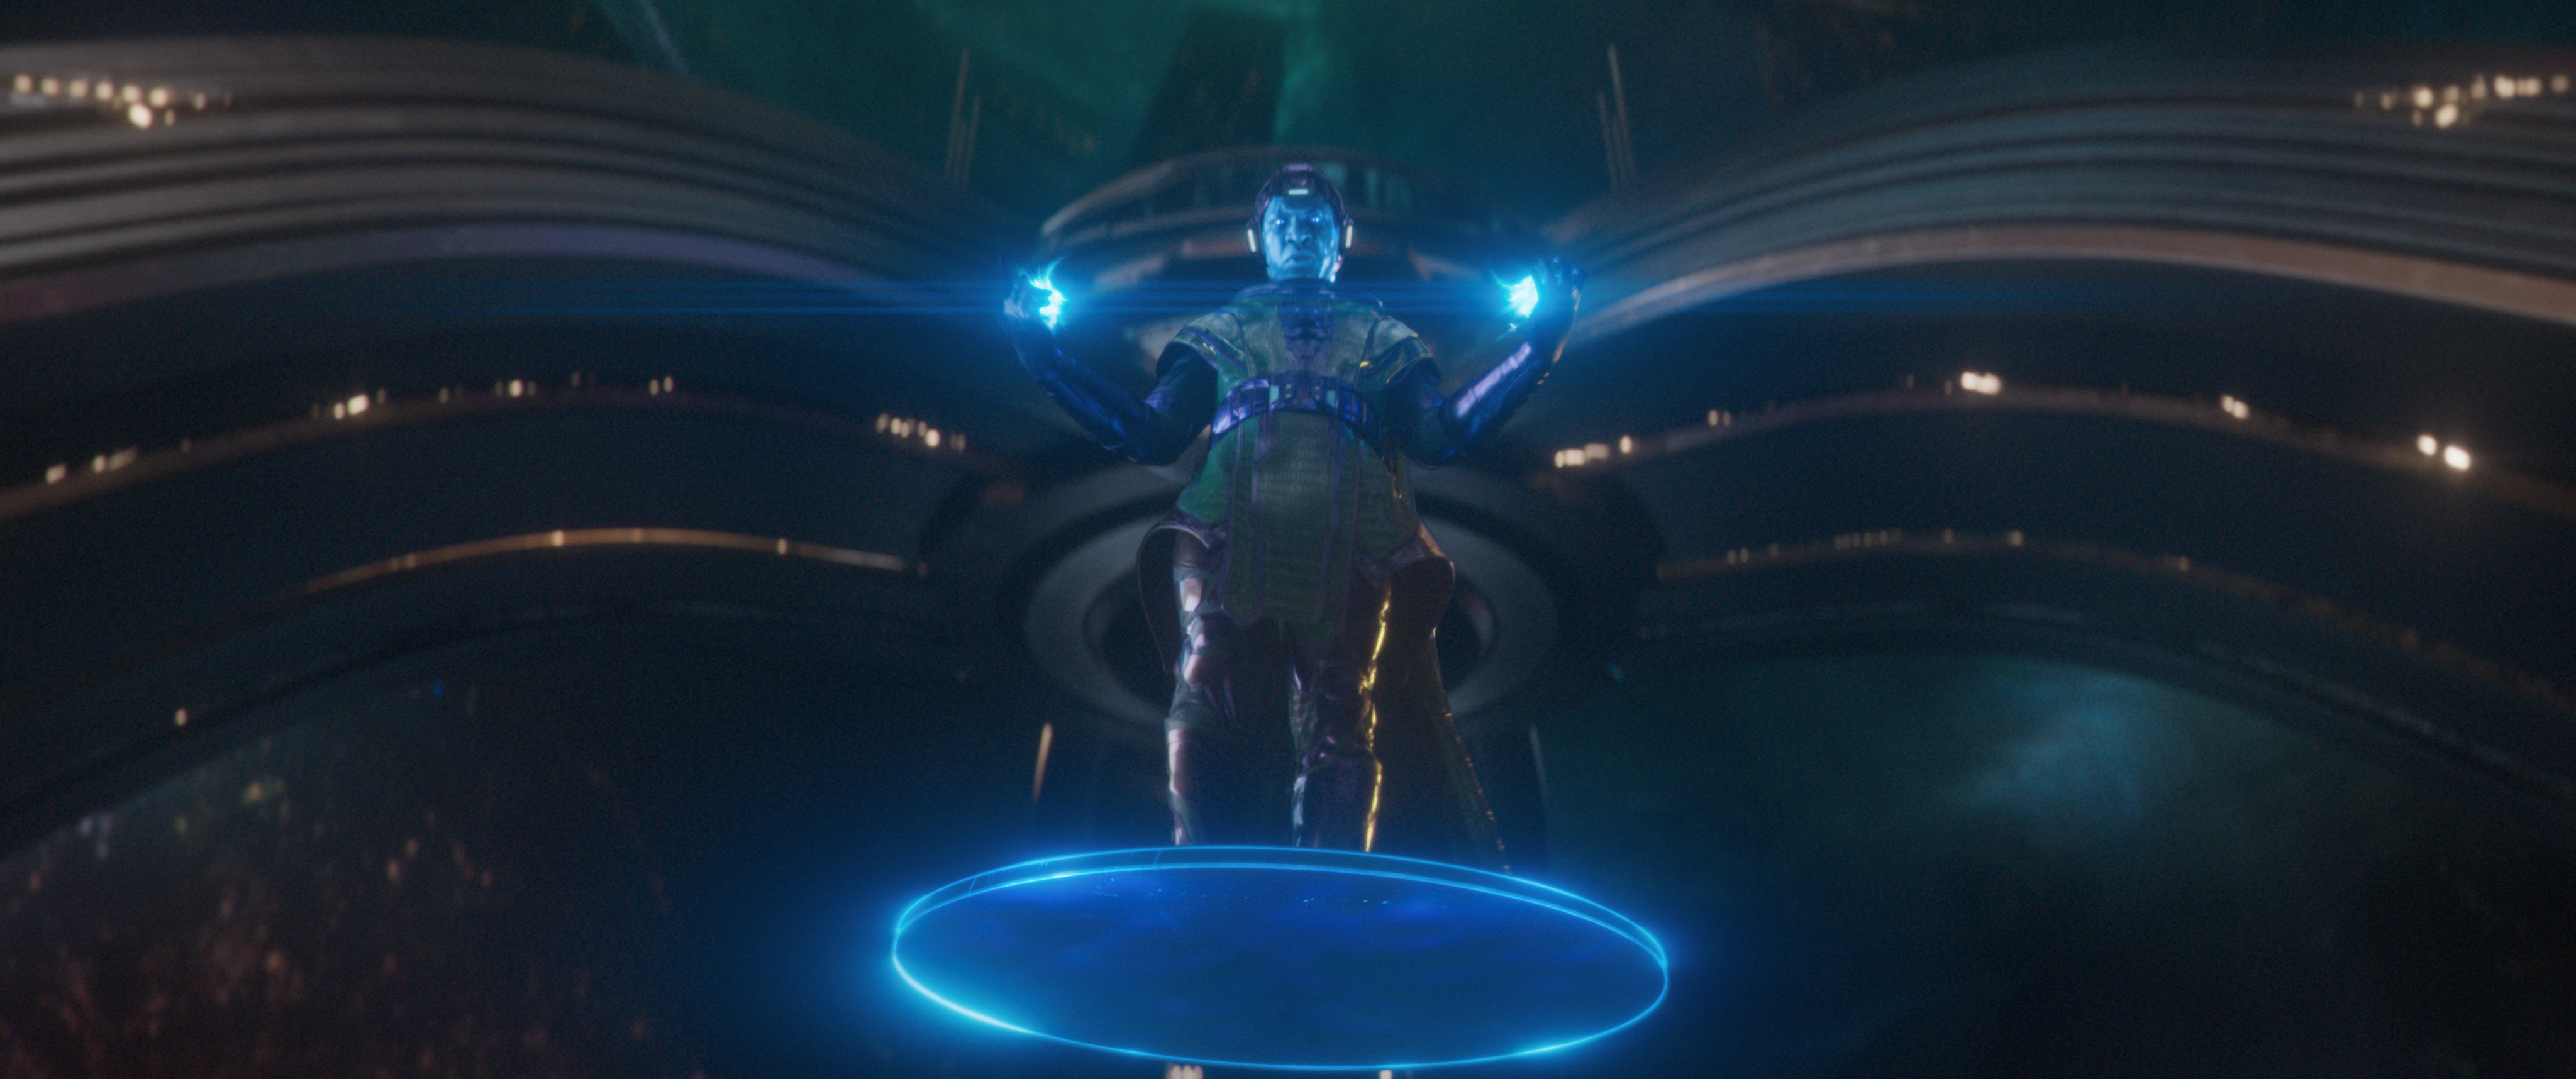 Jonathan Majors as Kang The Conqueror in <i>Ant-Man and the Wasp: Quantumania</i> (Marvel Studios)